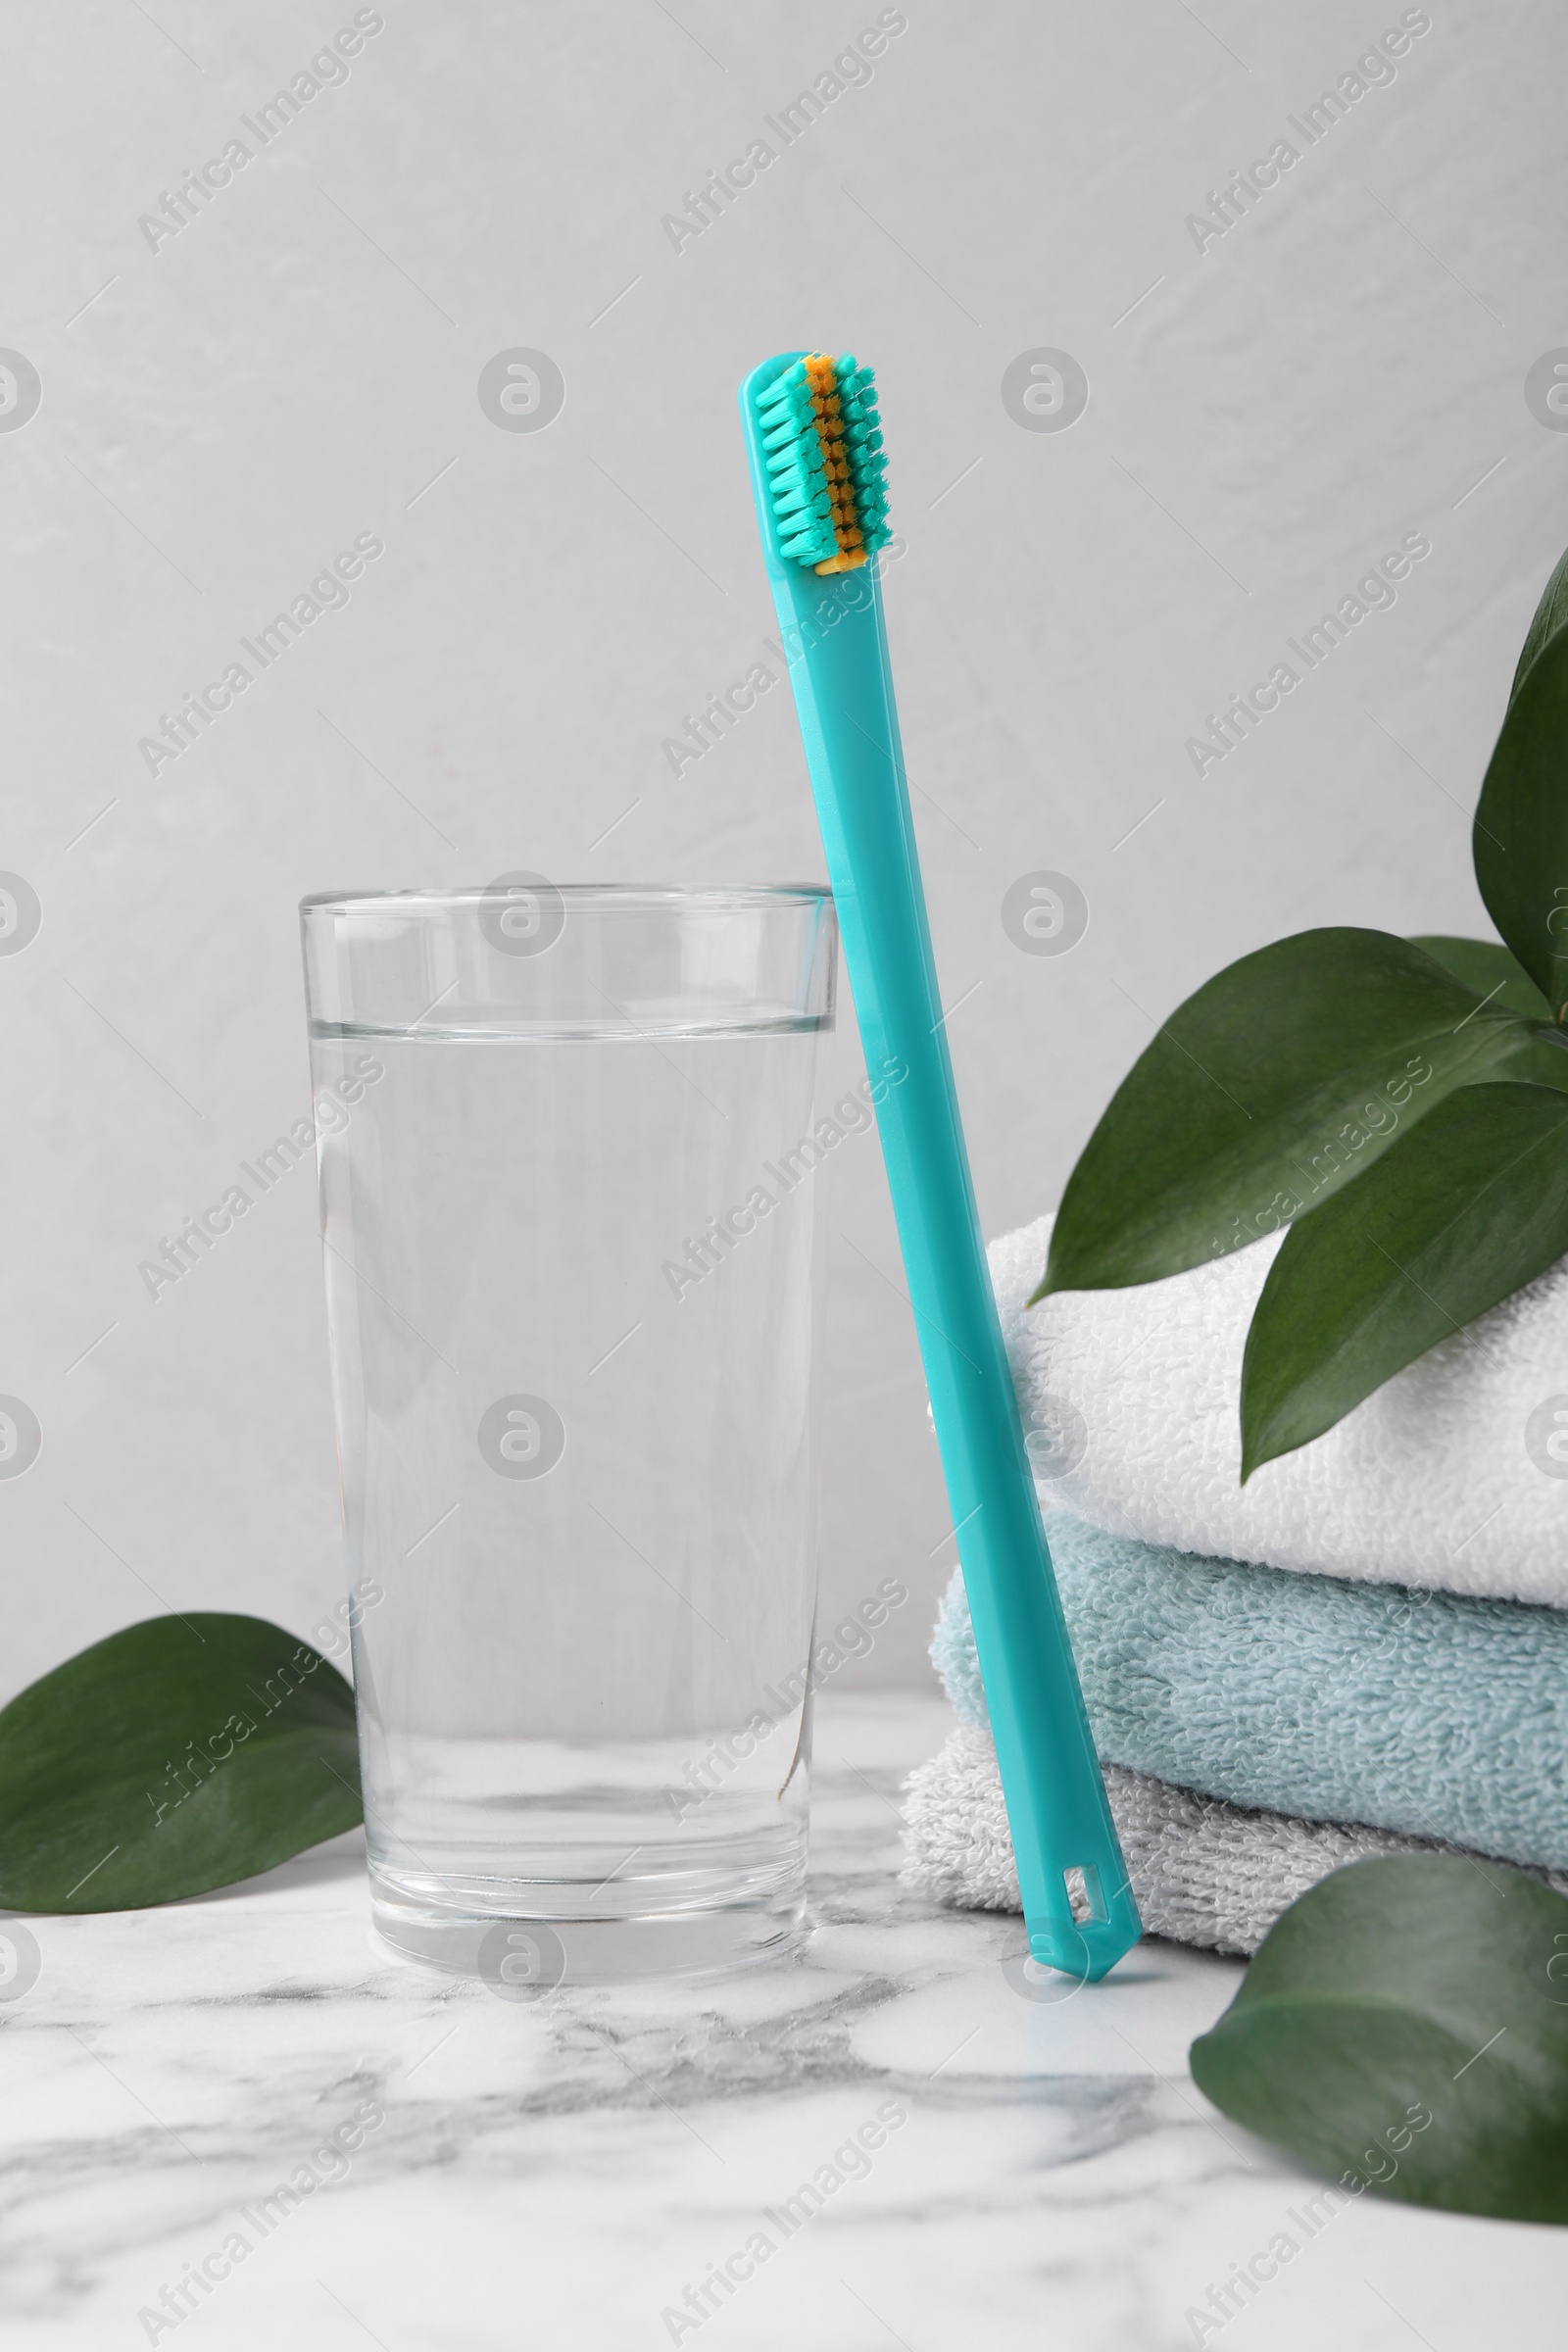 Photo of Plastic toothbrush, glass of water, towels and green leaves on white marble table